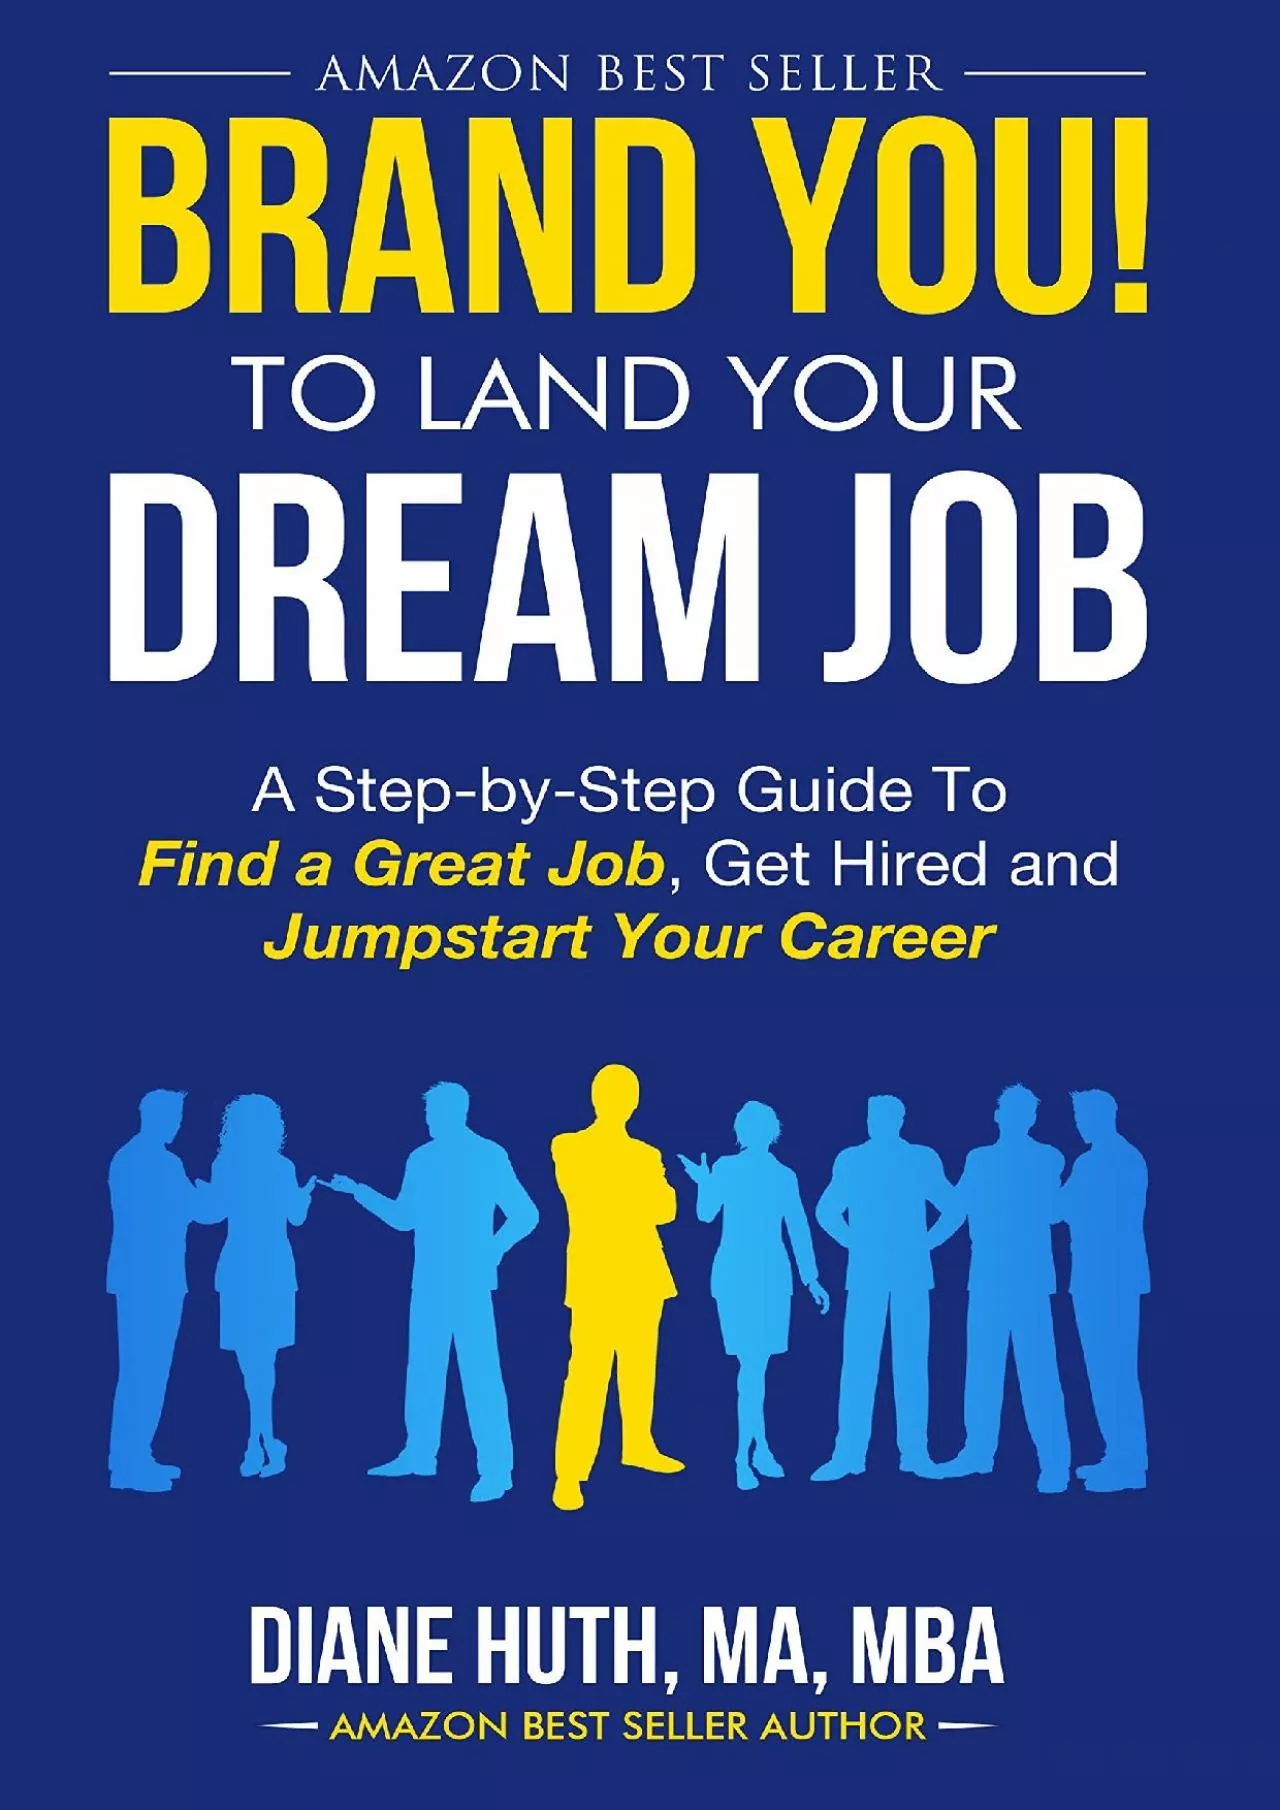 BRAND YOU To Land Your Dream Job: A Step-by-Step Guide To Find A Great Job, Get Hired